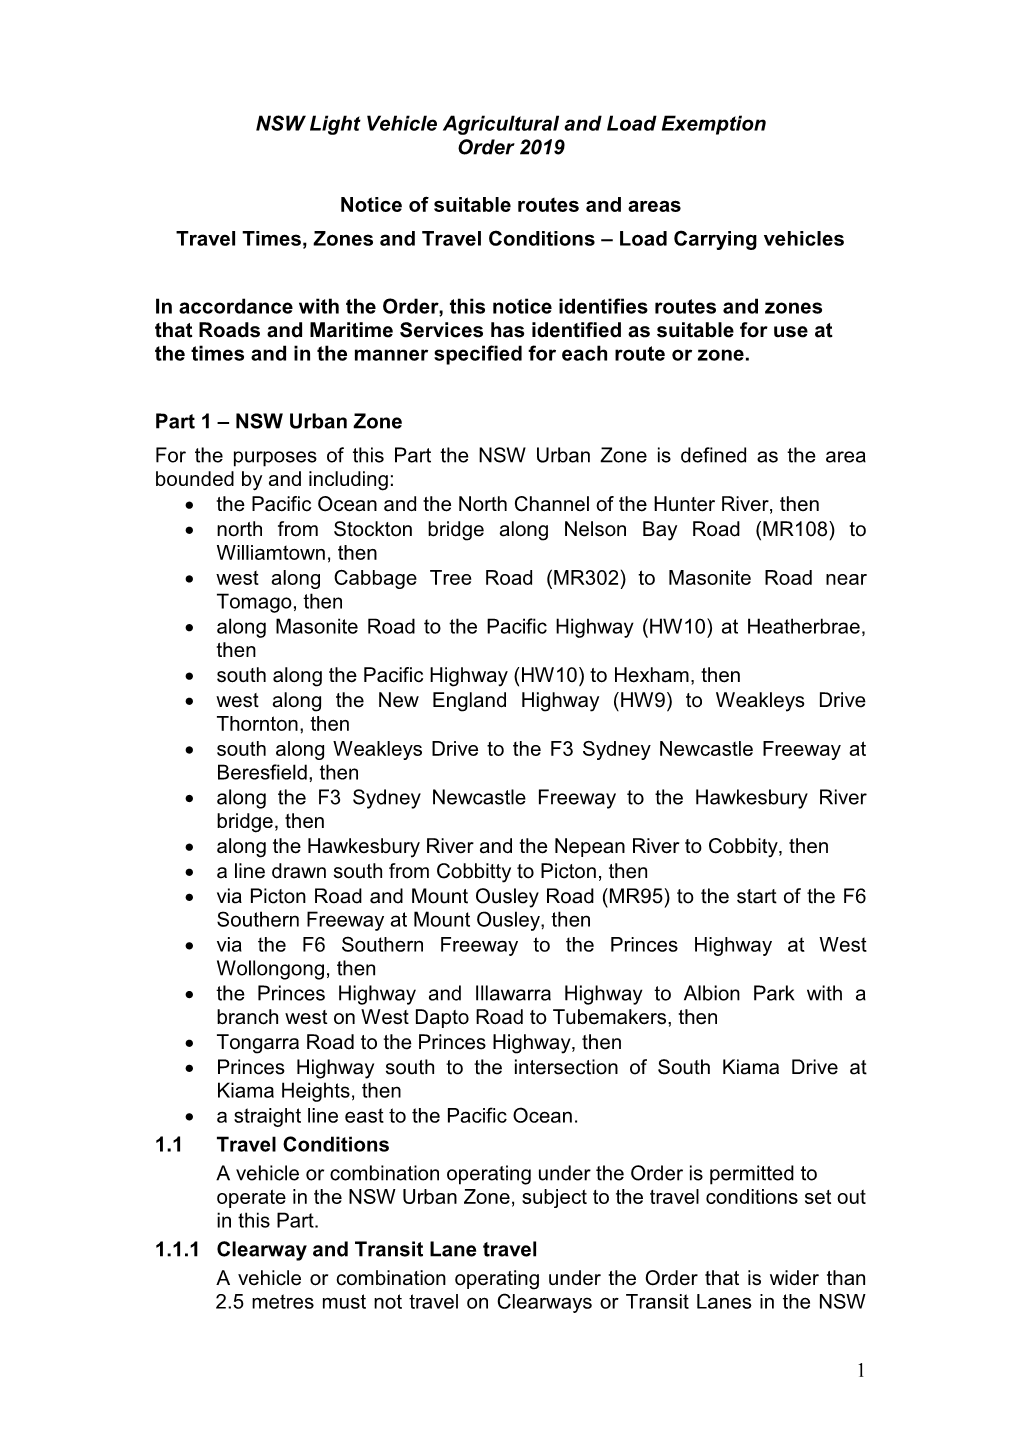 NSW Light Vehicles Agricultural and Load Exemption Order 2019